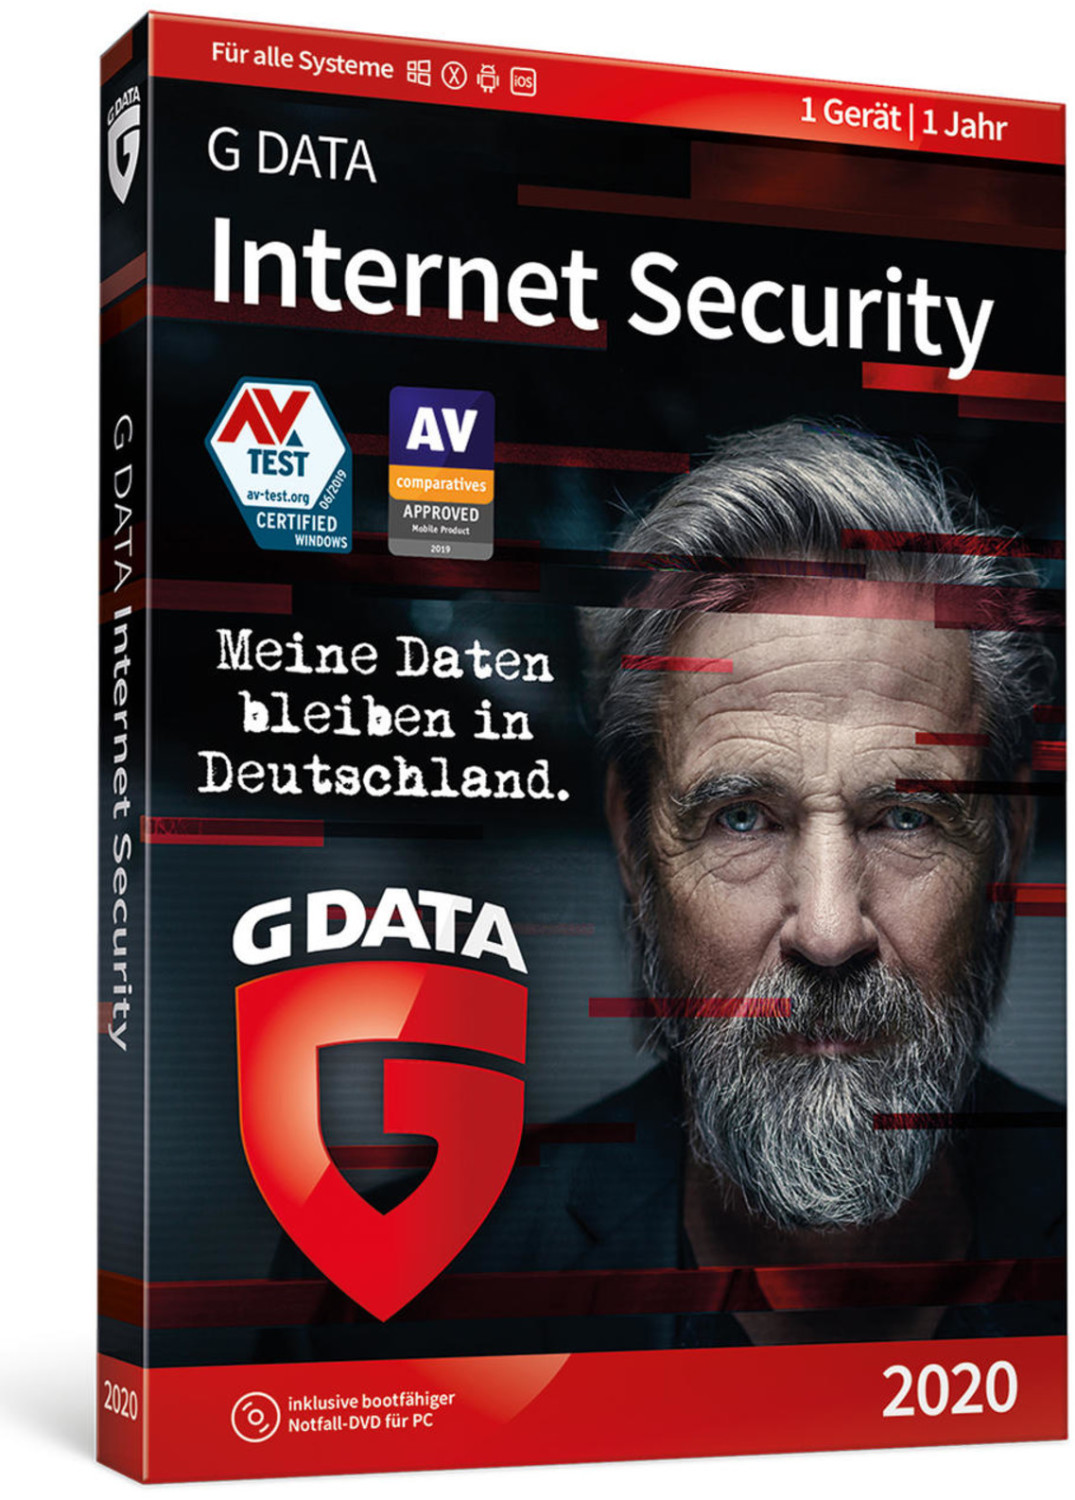 Pcs 2 g internet android 2 jahr 1 data security Download FREE